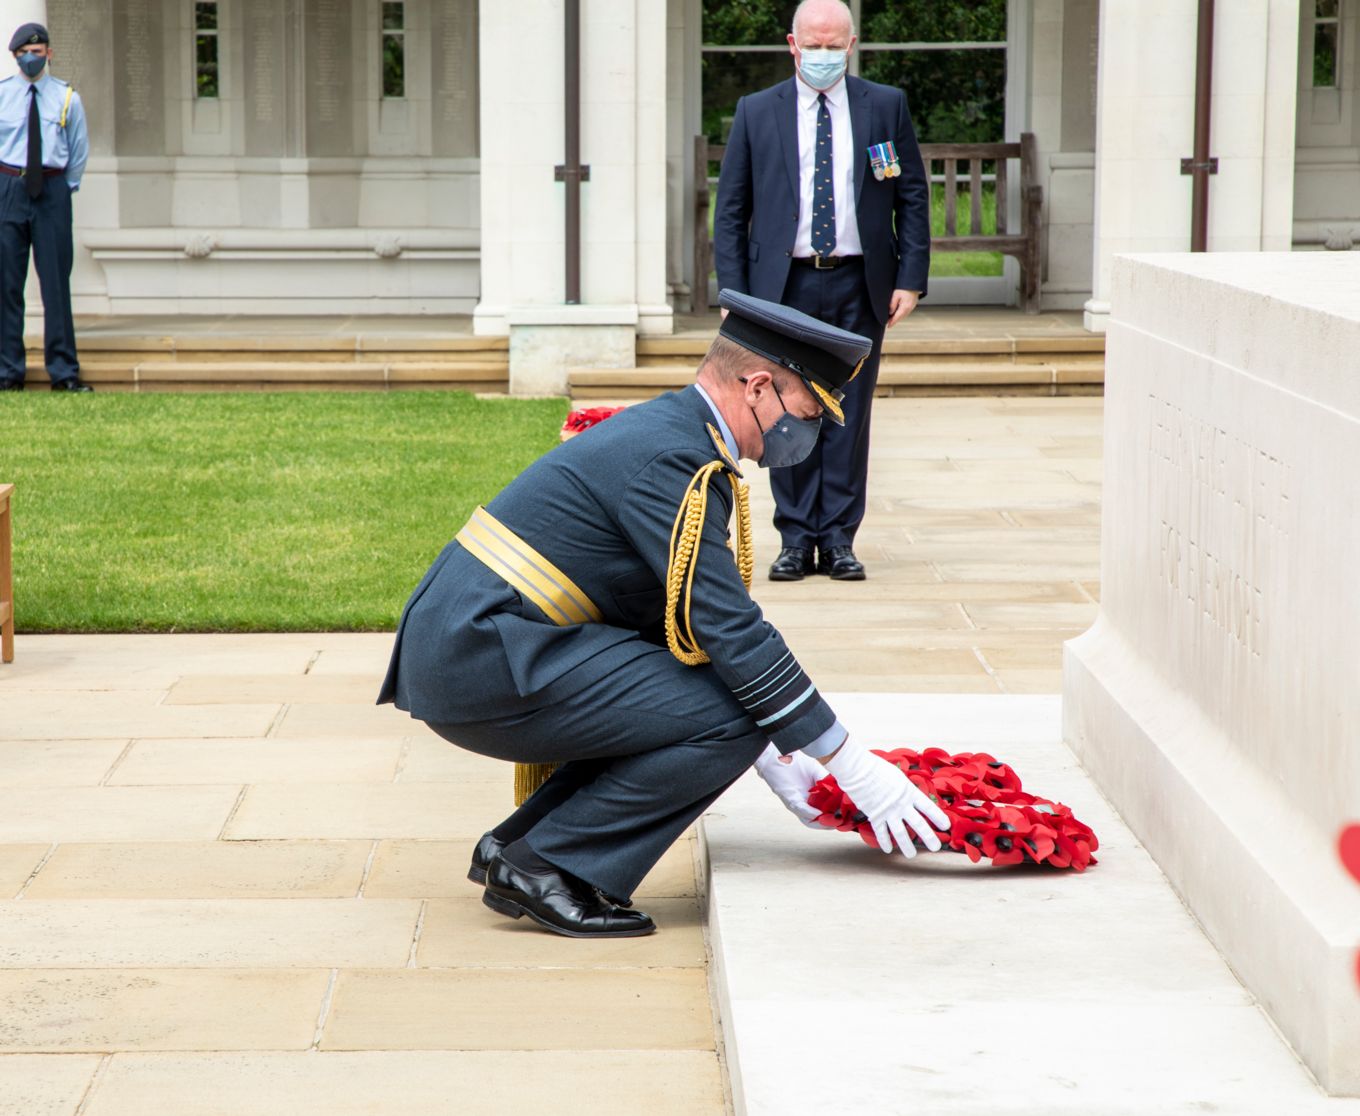 Image shows the Chief of the Air Staff, Air Chief Marshal Sir Mike Wigston laying a wreath.